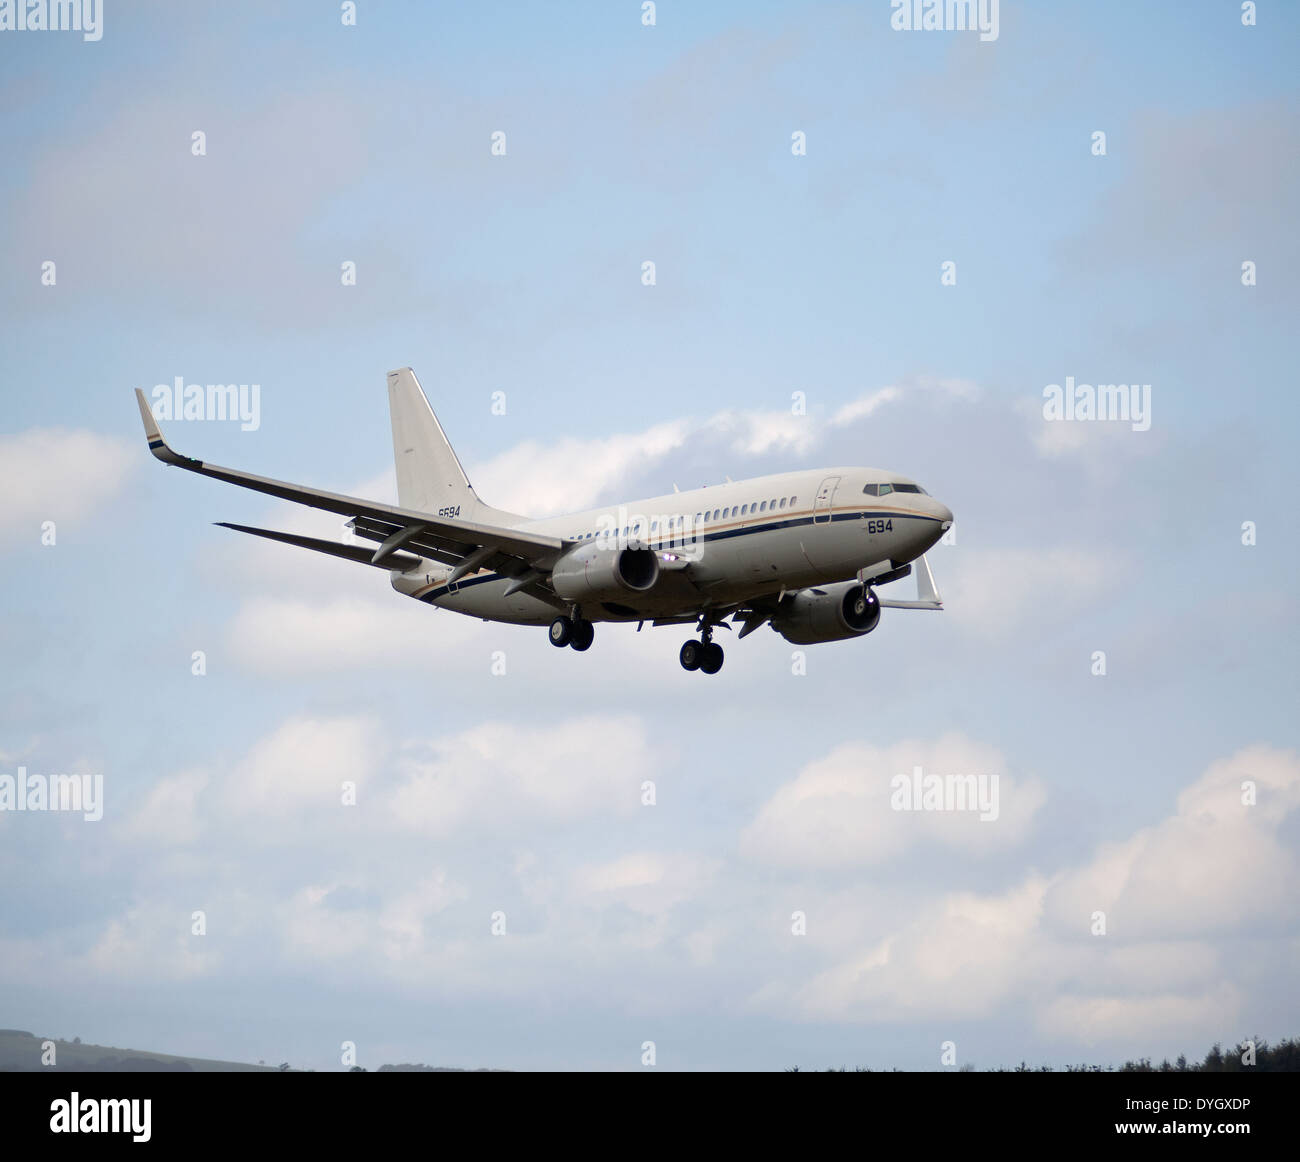 Boeing C-40A Clipper N°16-6695 US NAVY on Approach to RAF Lossiemouth Scotland. SCO 9046 Stock Photo